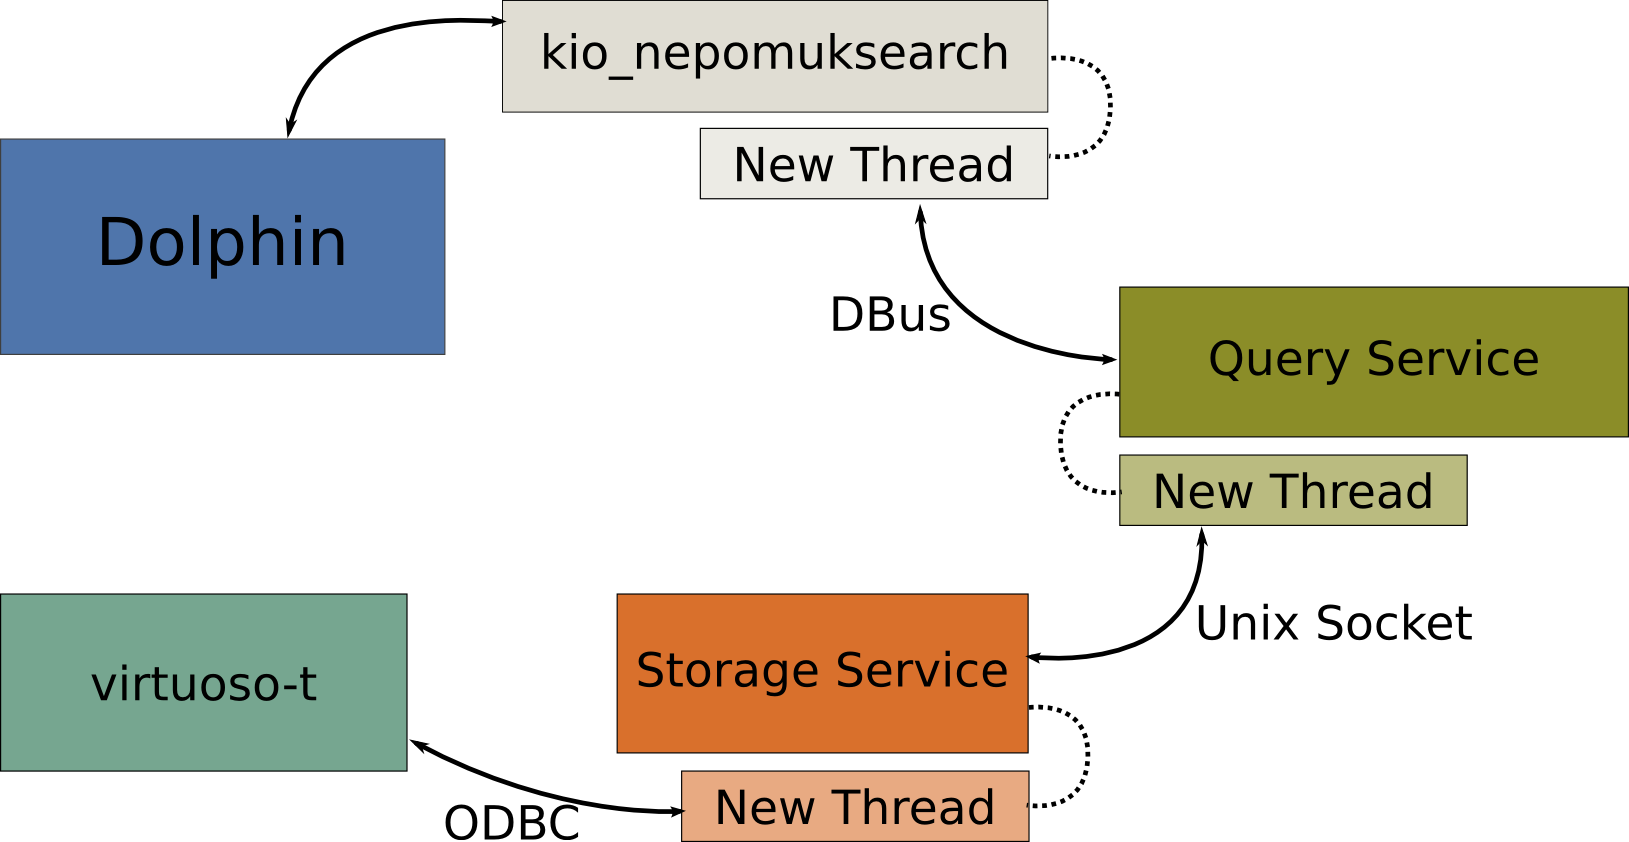 The Nepomuk Architecture